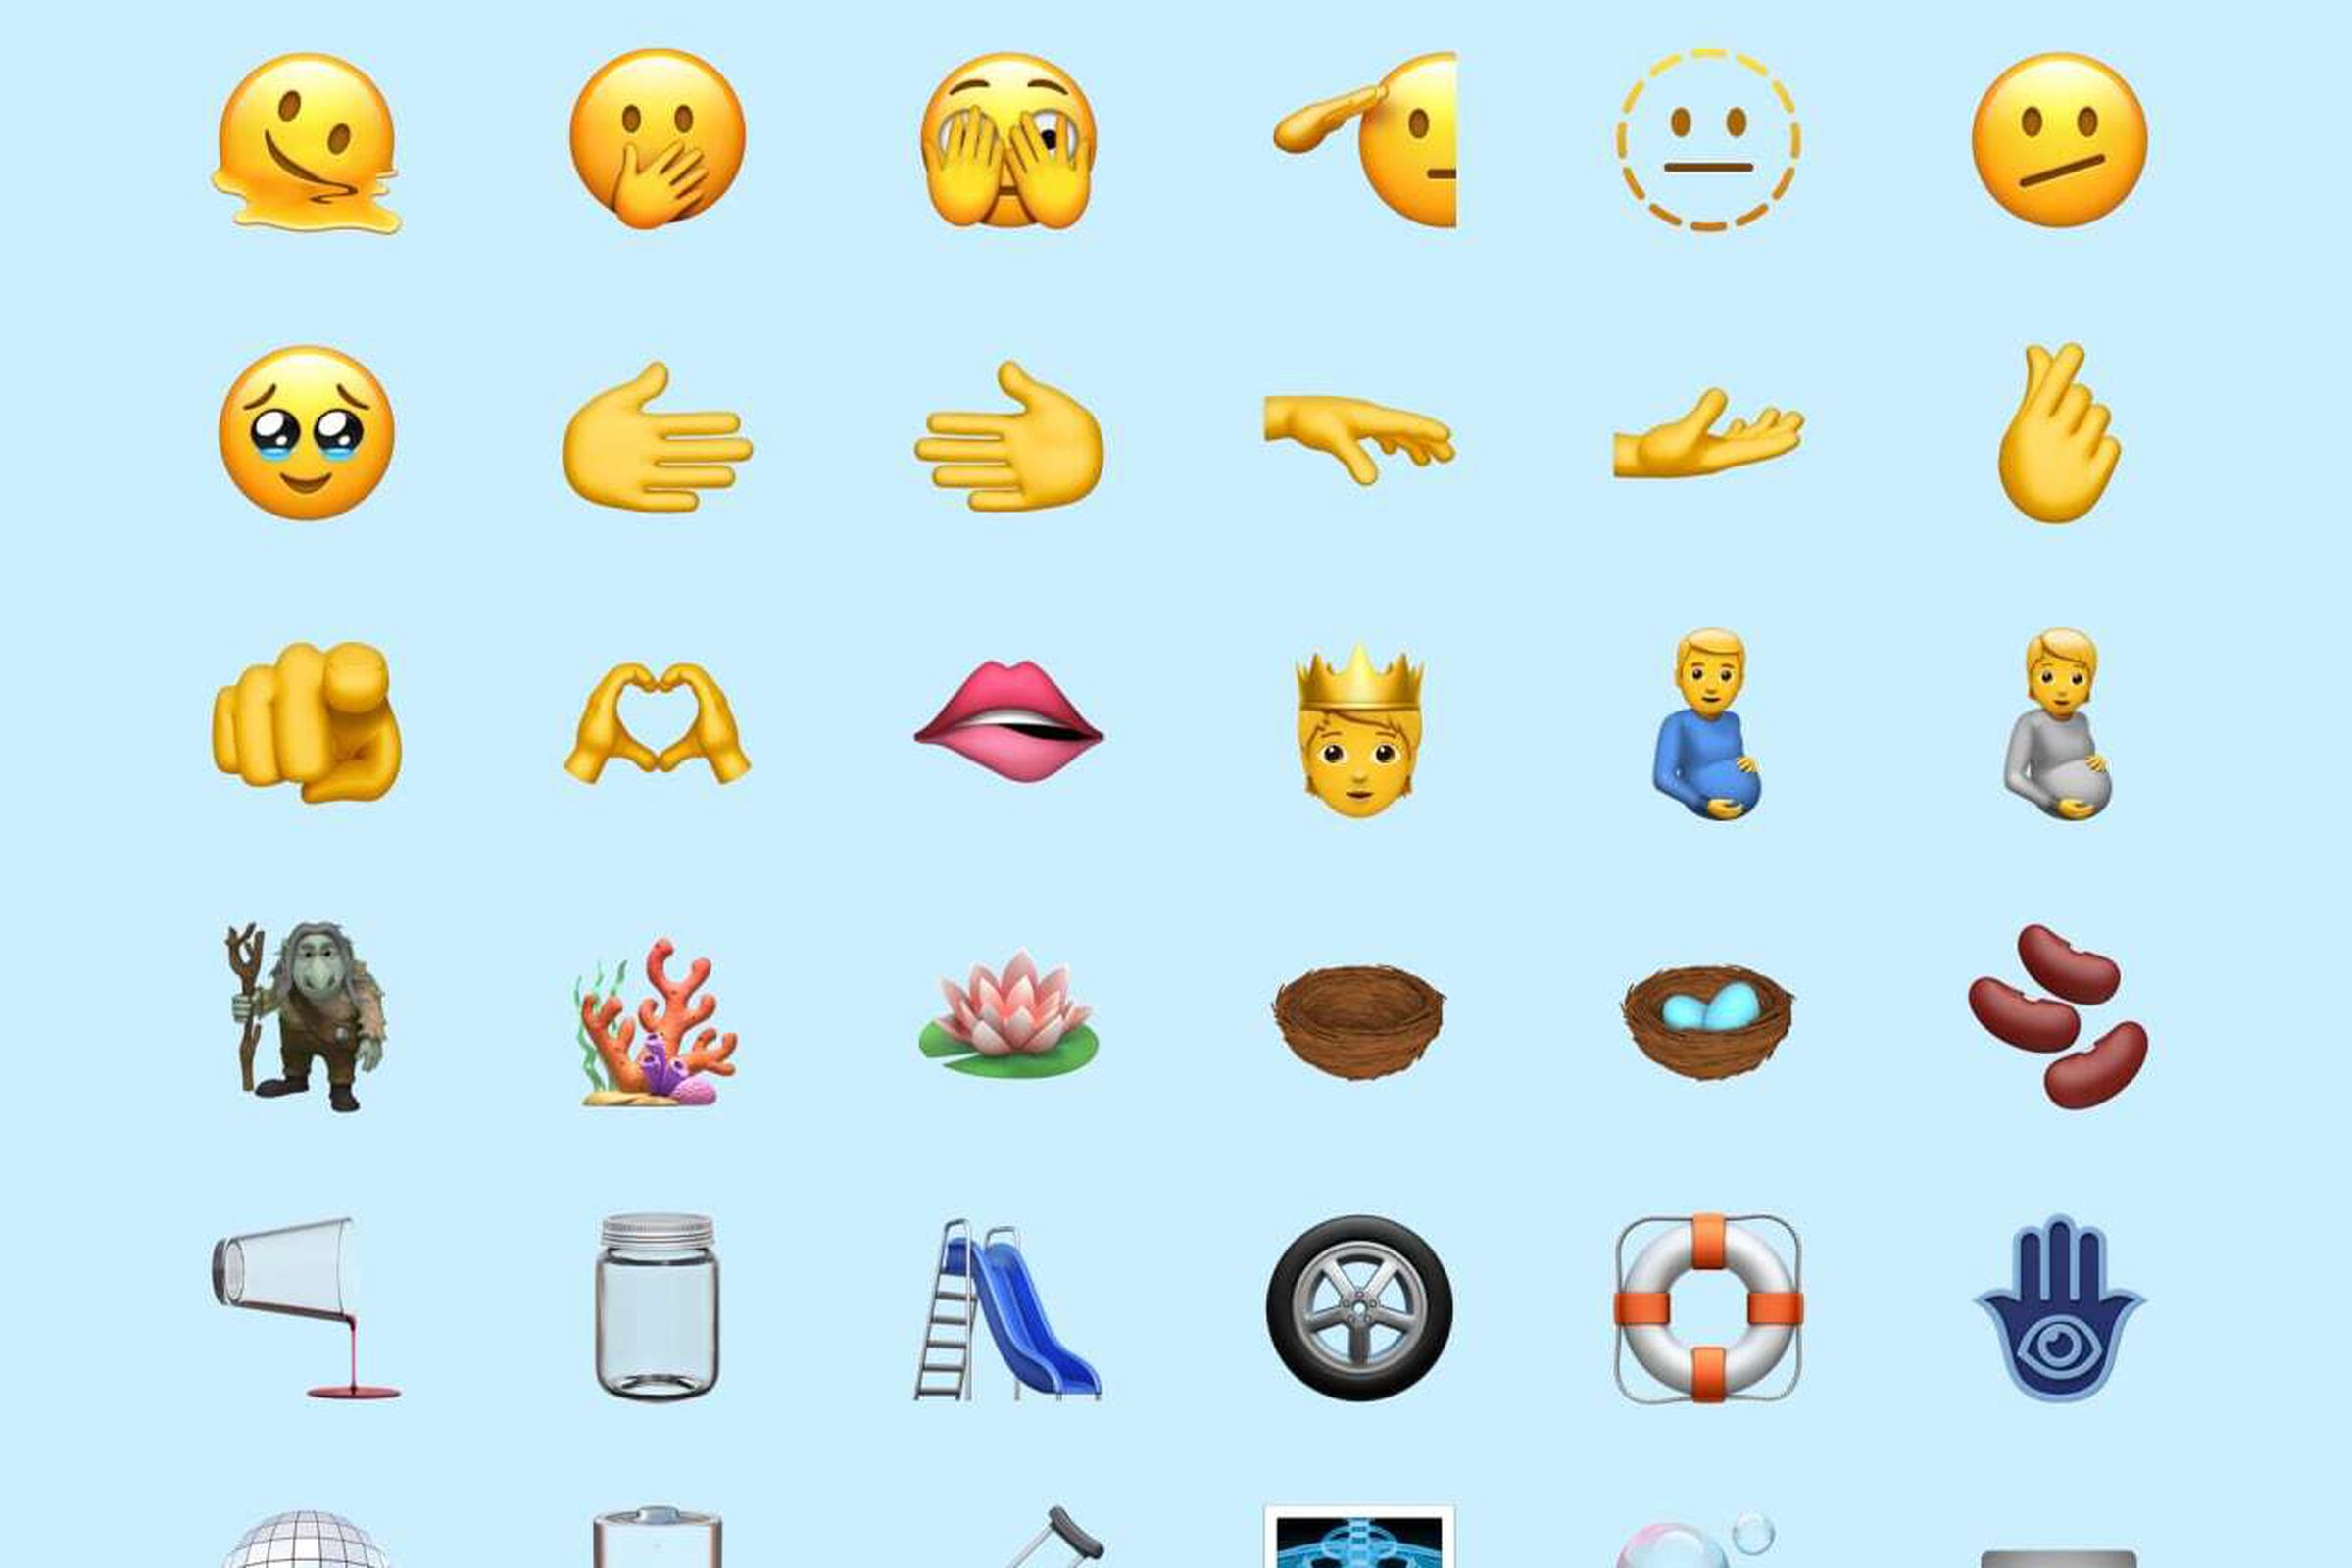 Rows of emojis including biting lip, a troll, coral, lotus flower, bird nests, beans, glass spilling water, slide, tire, ring buoy, hamsa, disco ball, low battery, crutch, X-ray, bubbles, ID card, and heavy equal sign.